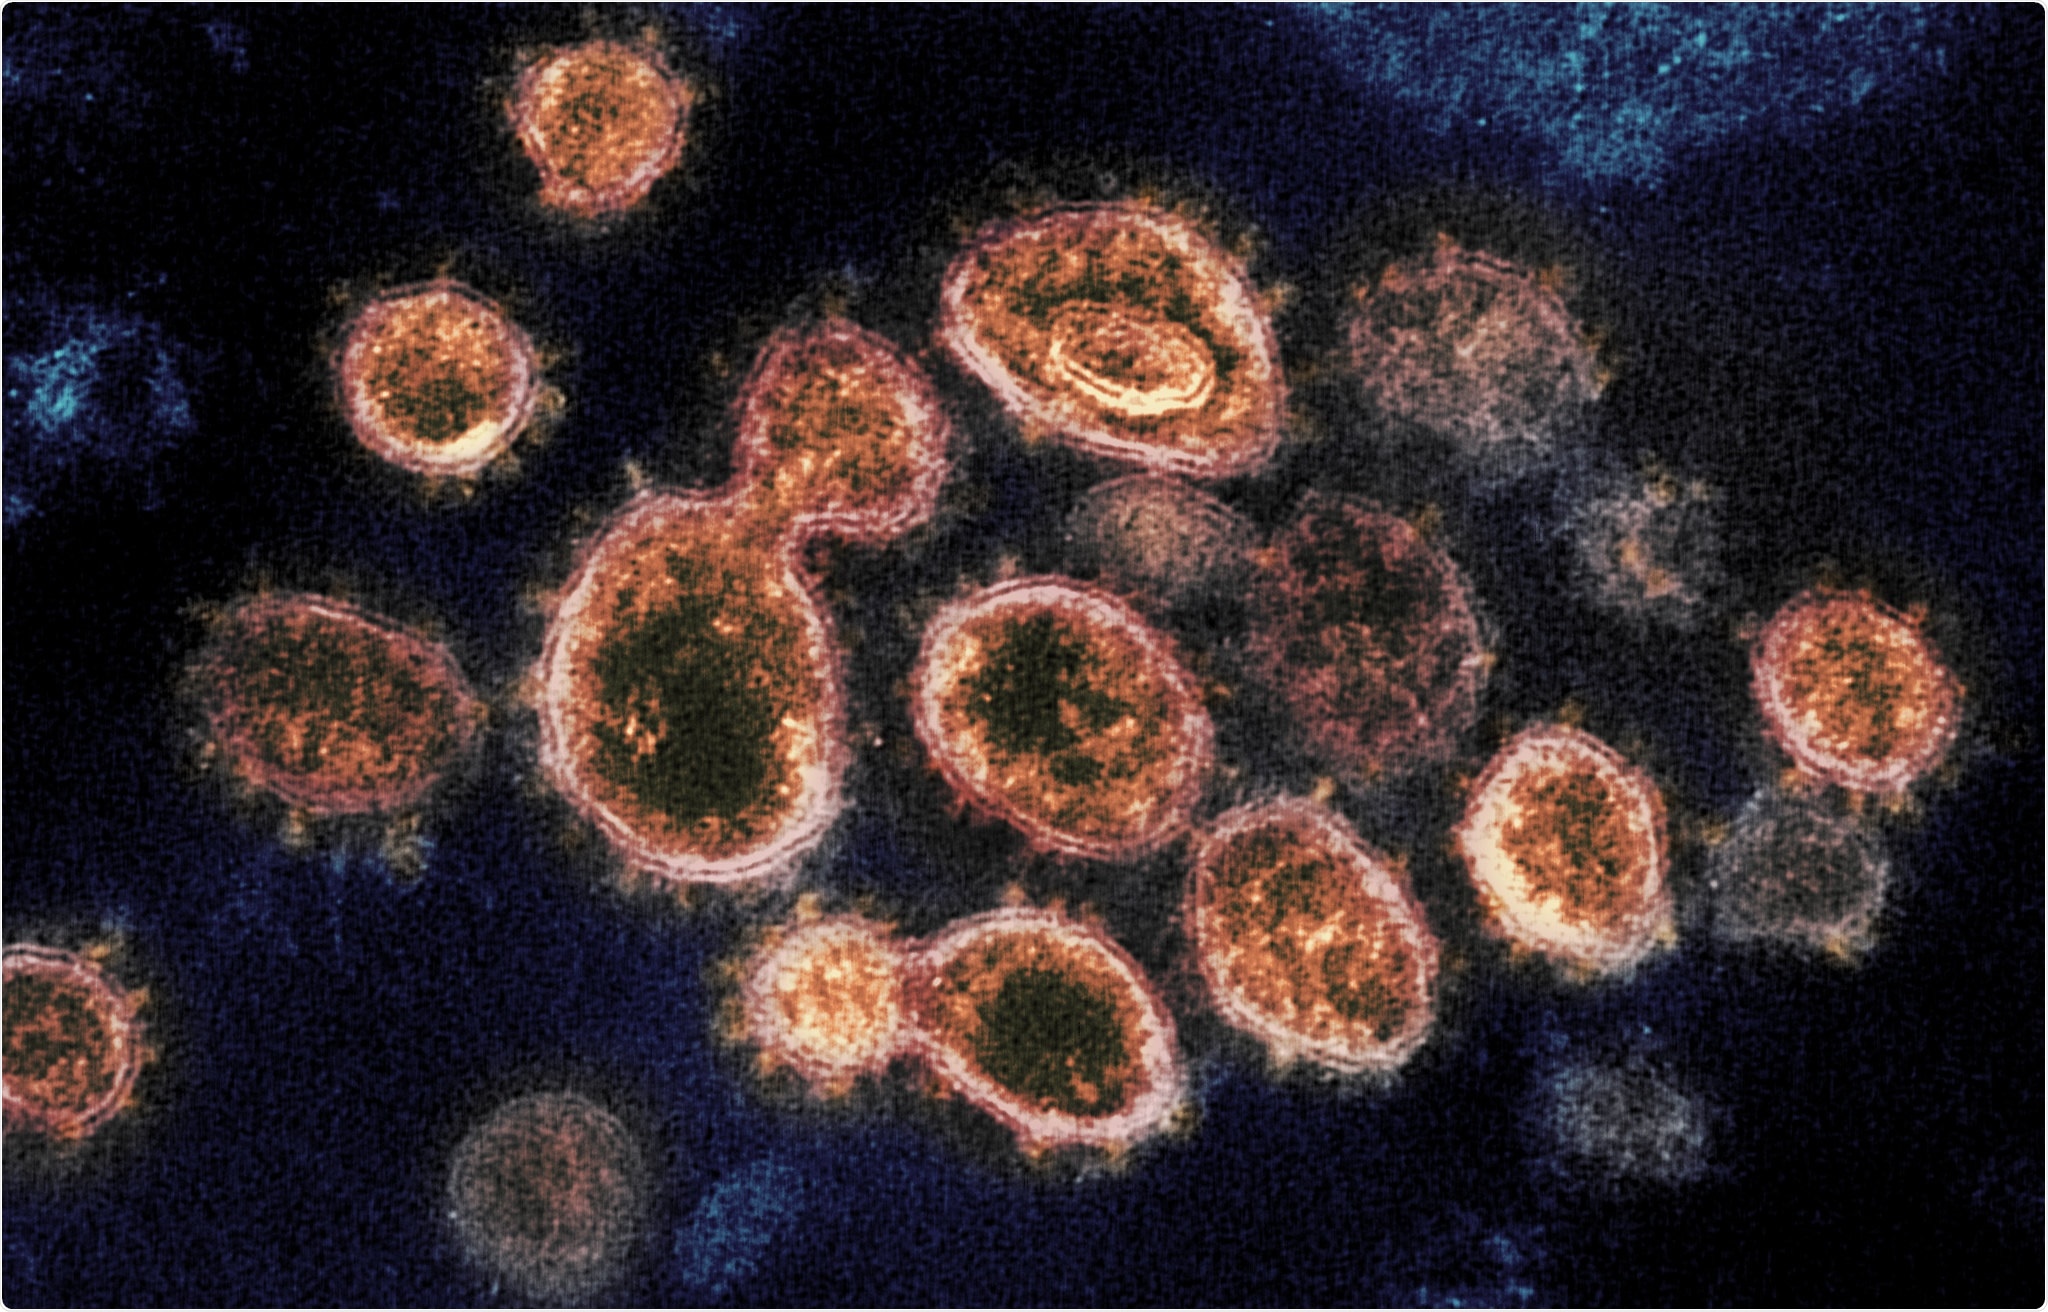 This transmission electron microscope image shows SARS-CoV-2, the virus that causes COVID-19, isolated from a patient in the U.S. Virus particles are shown emerging from the surface of cells cultured in the lab. The spikes on the outer edge of the virus particles give coronaviruses their name, crown-like. Image captured and colorized at NIAID